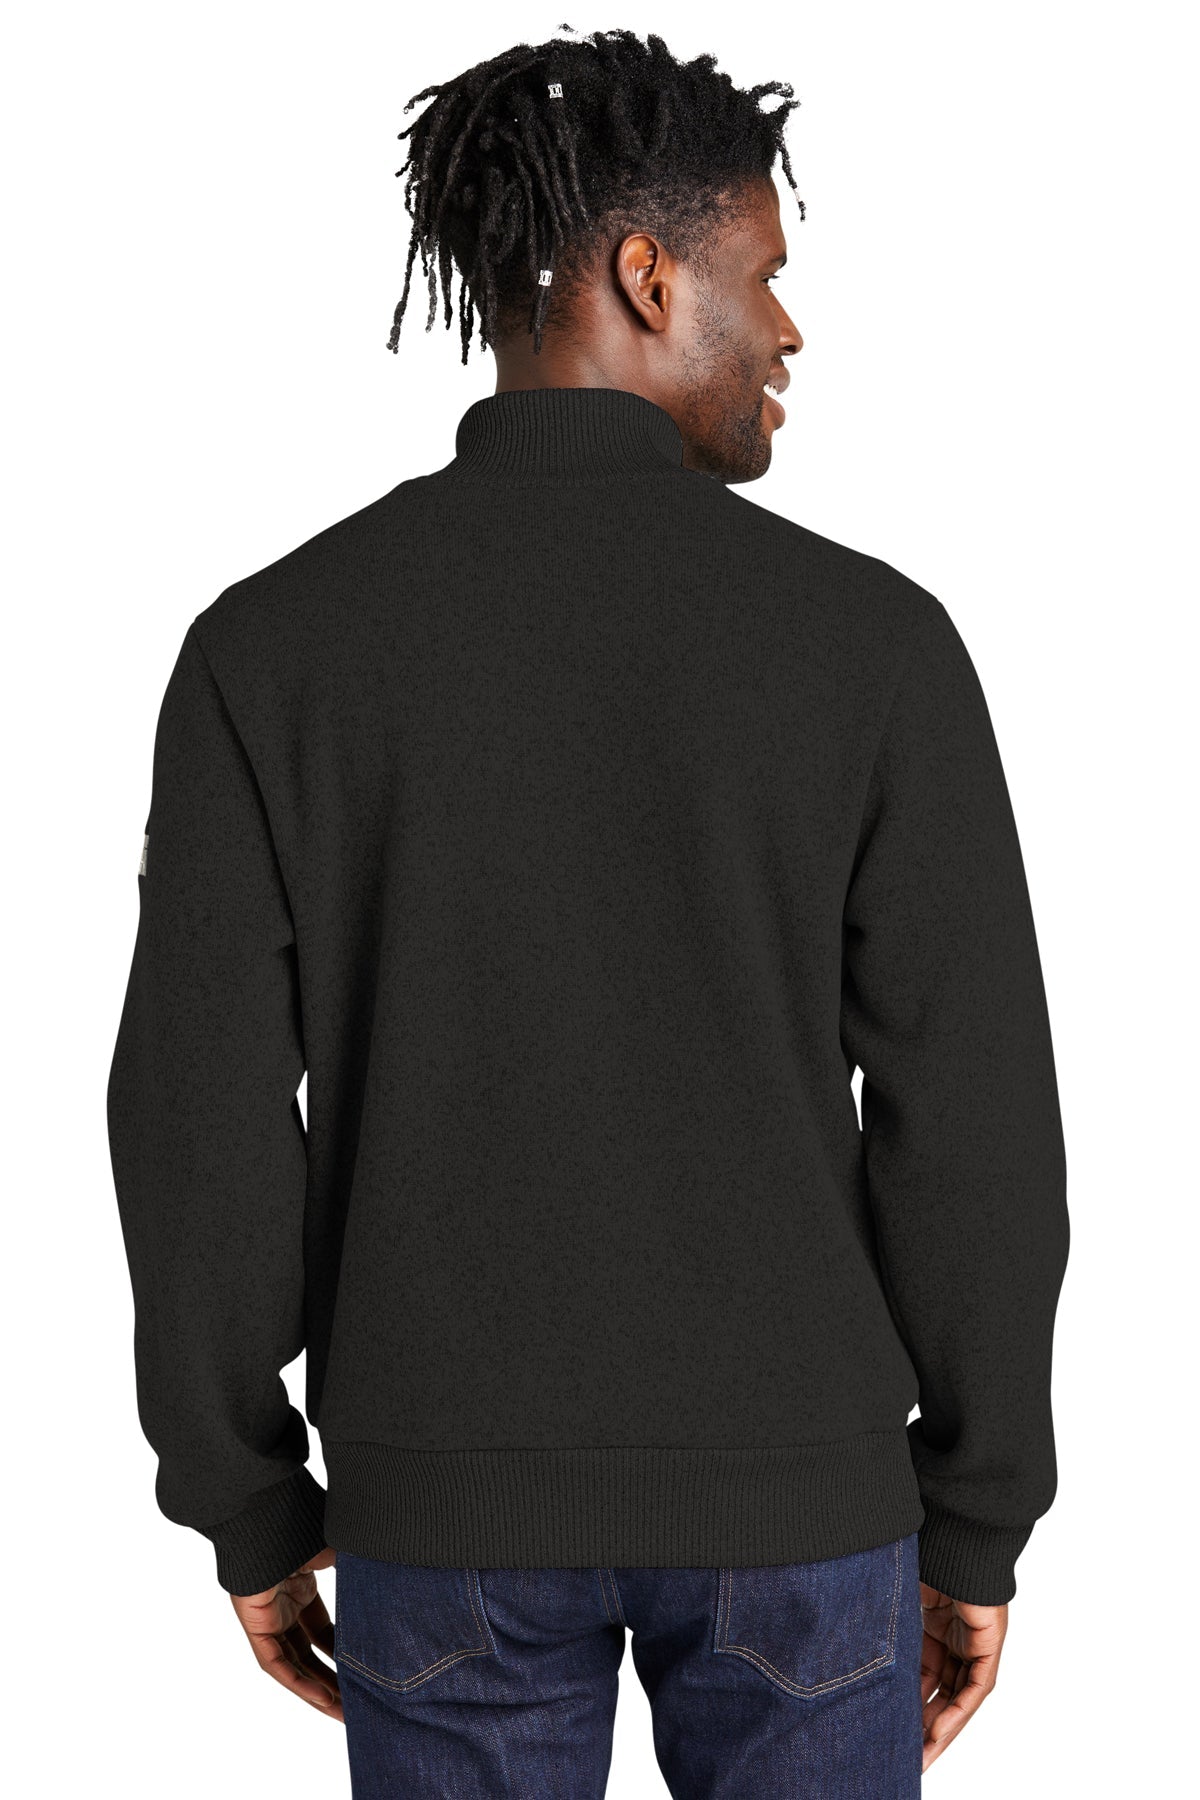 NF0A5ISE The North FaceÂ® Pullover 1/2-Zip Sweater Fleece